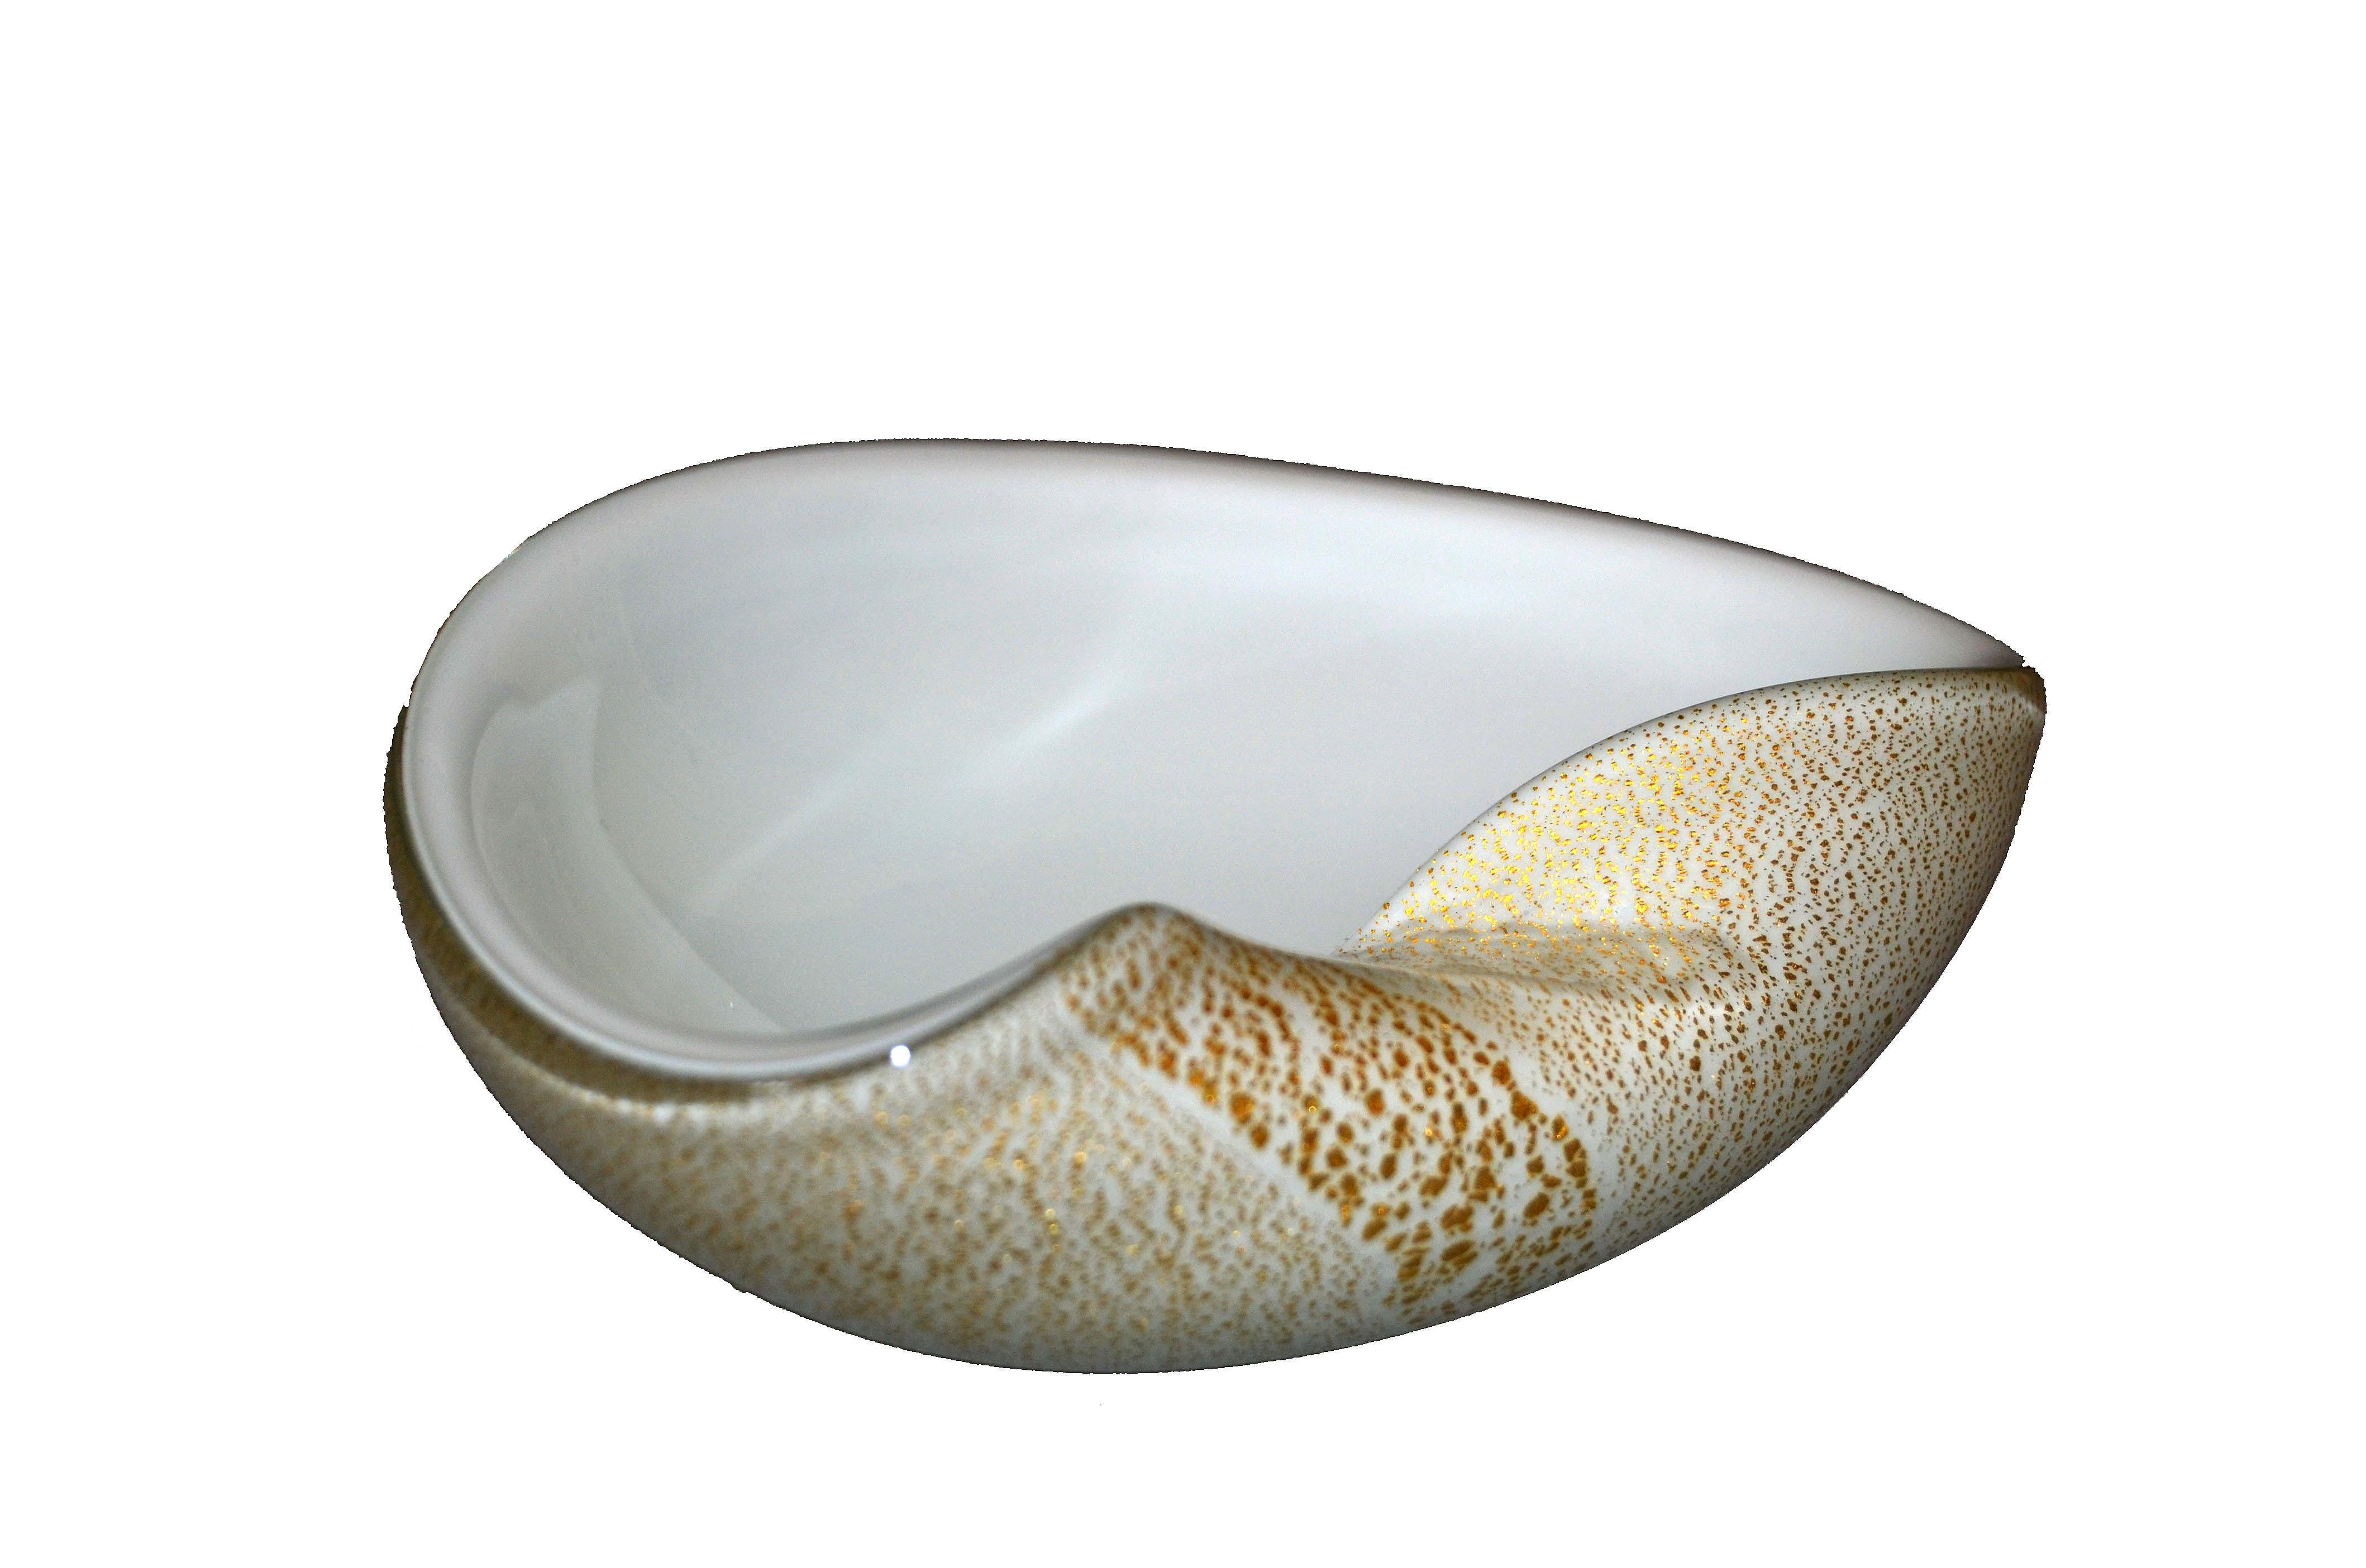 Hand blown white Murano art glass ashtray, decorative catchall or bowl made in Italy and inspired by Alfredo Barbini.
White filled glass with gold leaf speckled.